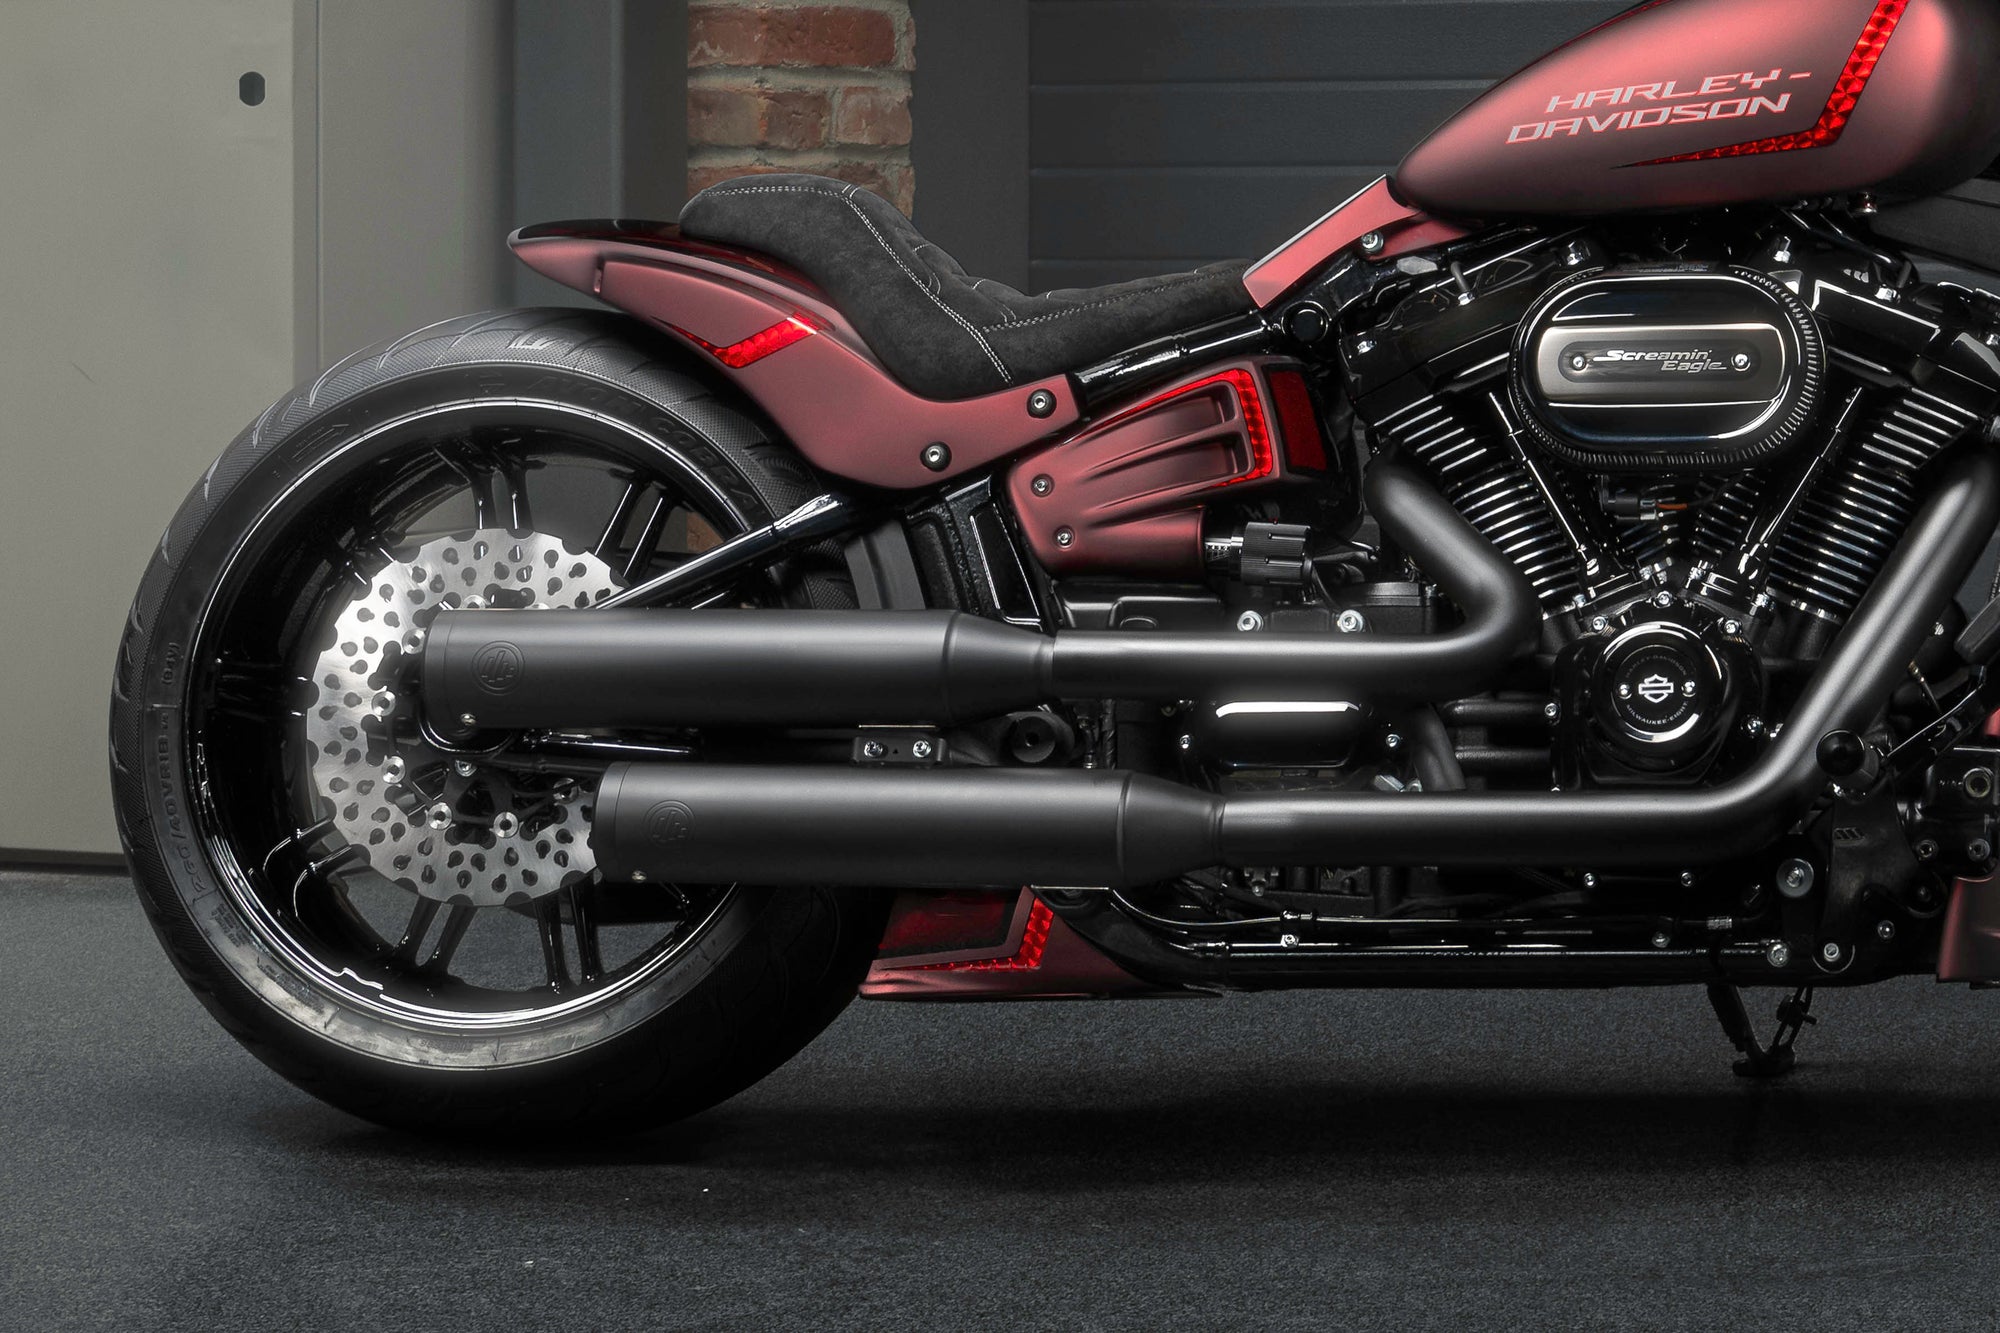 Zoomed Harley Davidson motorcycle with Killer Custom parts from the side in the garage